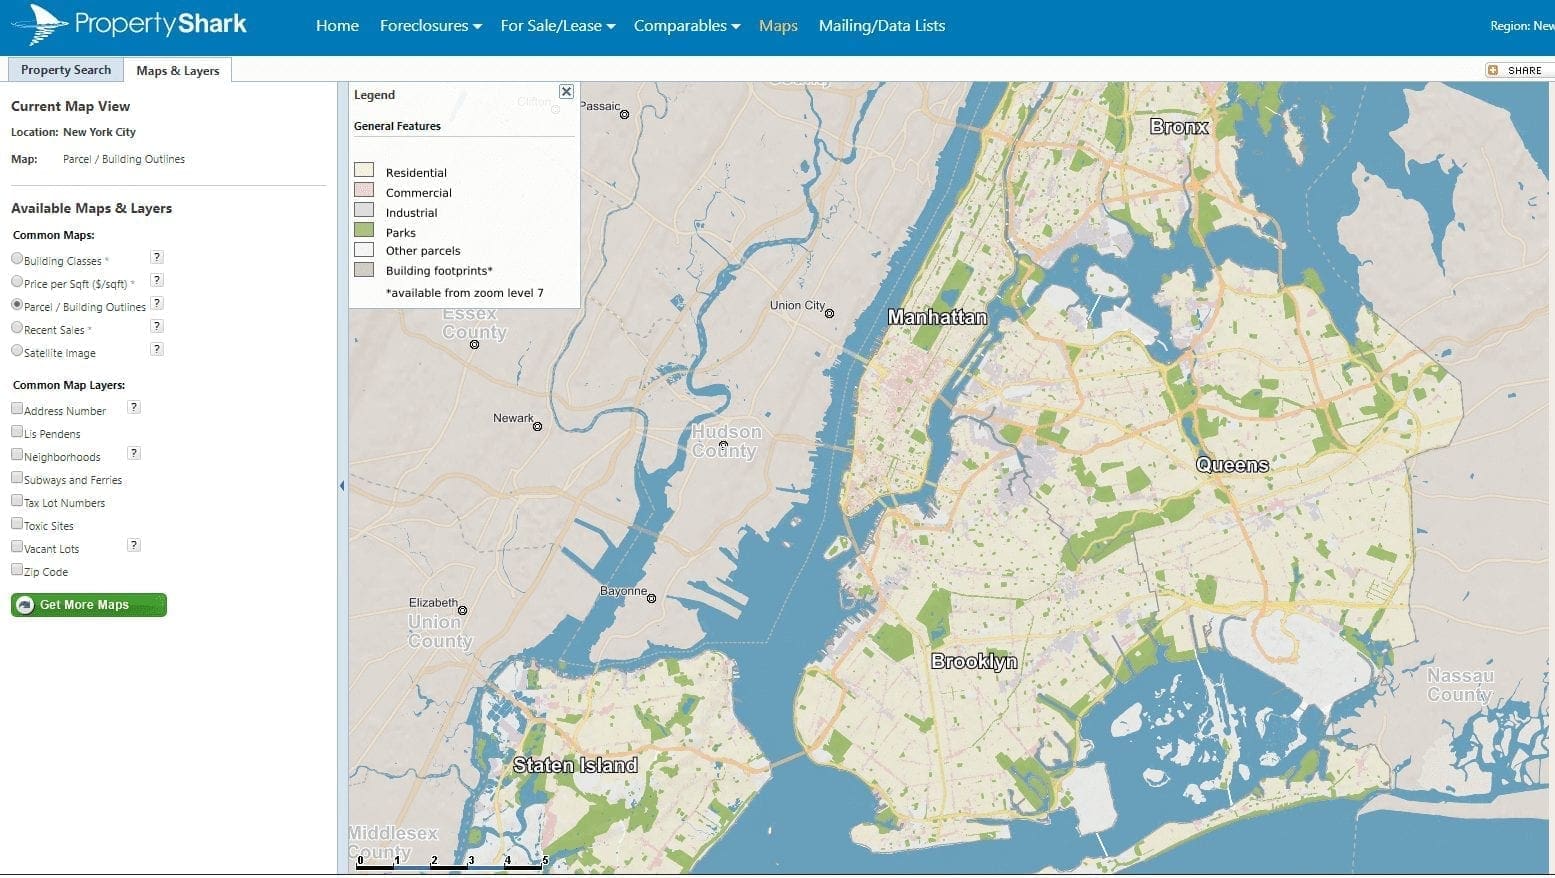 Screenshot of a PropertyShark map of the New York City area